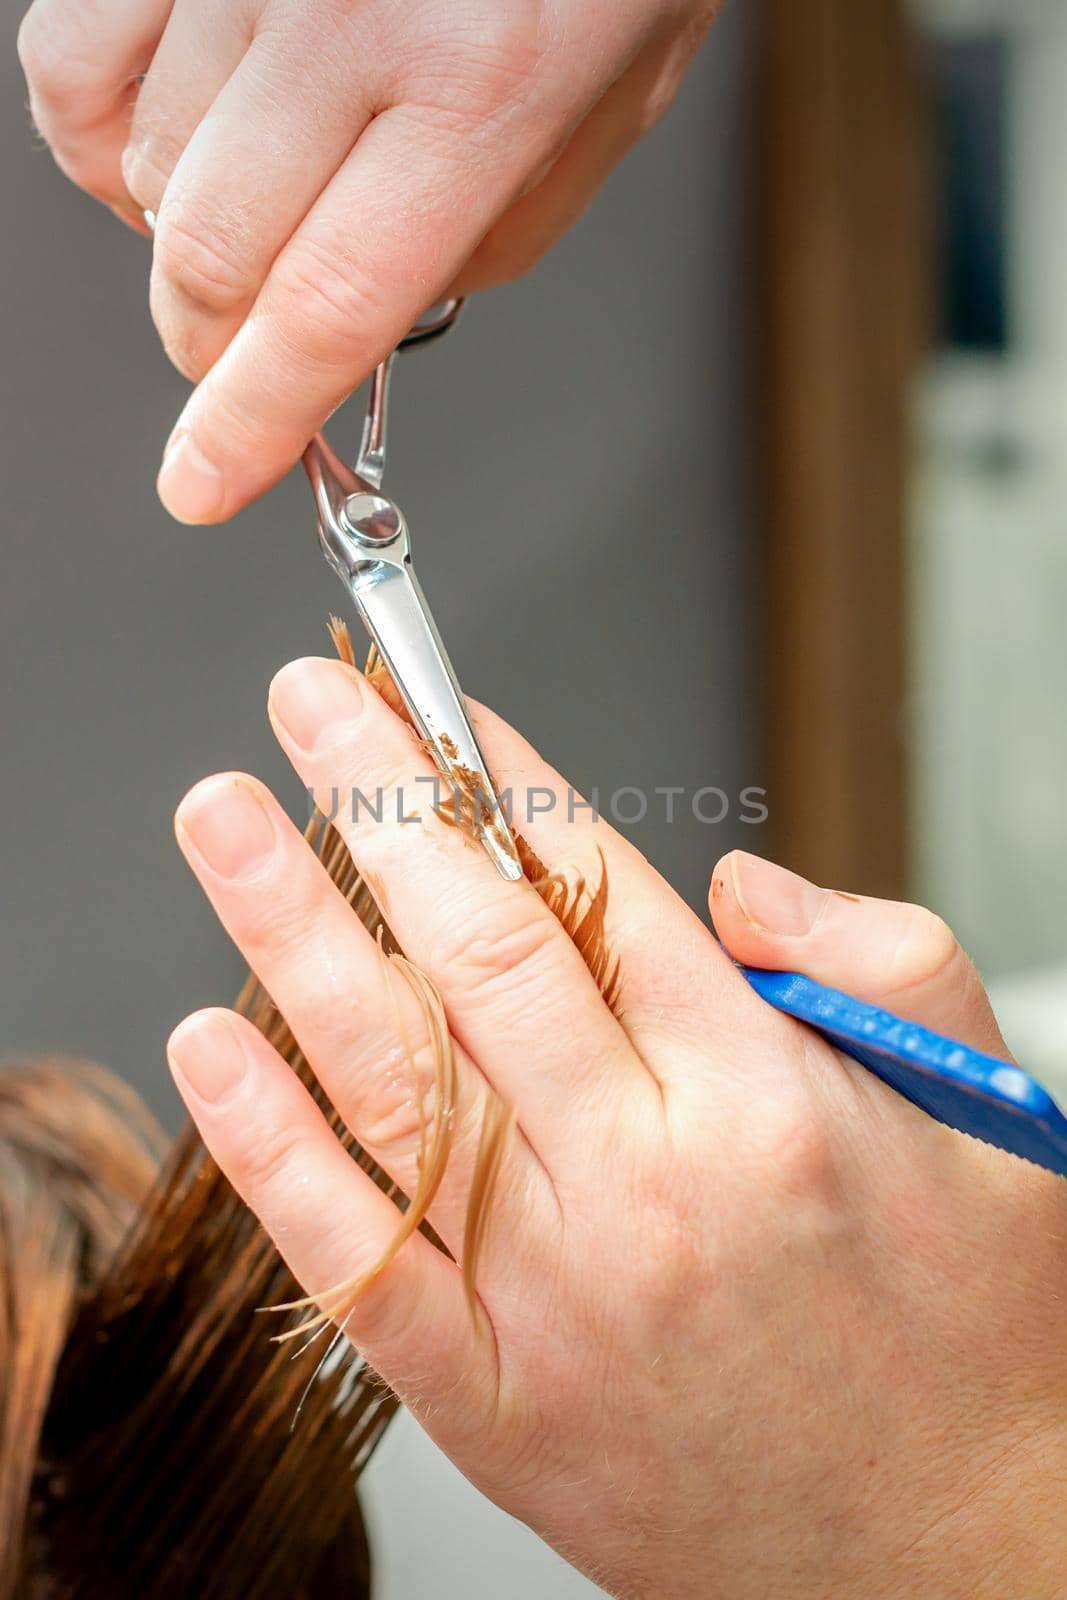 The hairdresser cuts the hair of a brunette woman. Hairstylist is cutting the hair of female client in a professional hair salon, close up. by okskukuruza